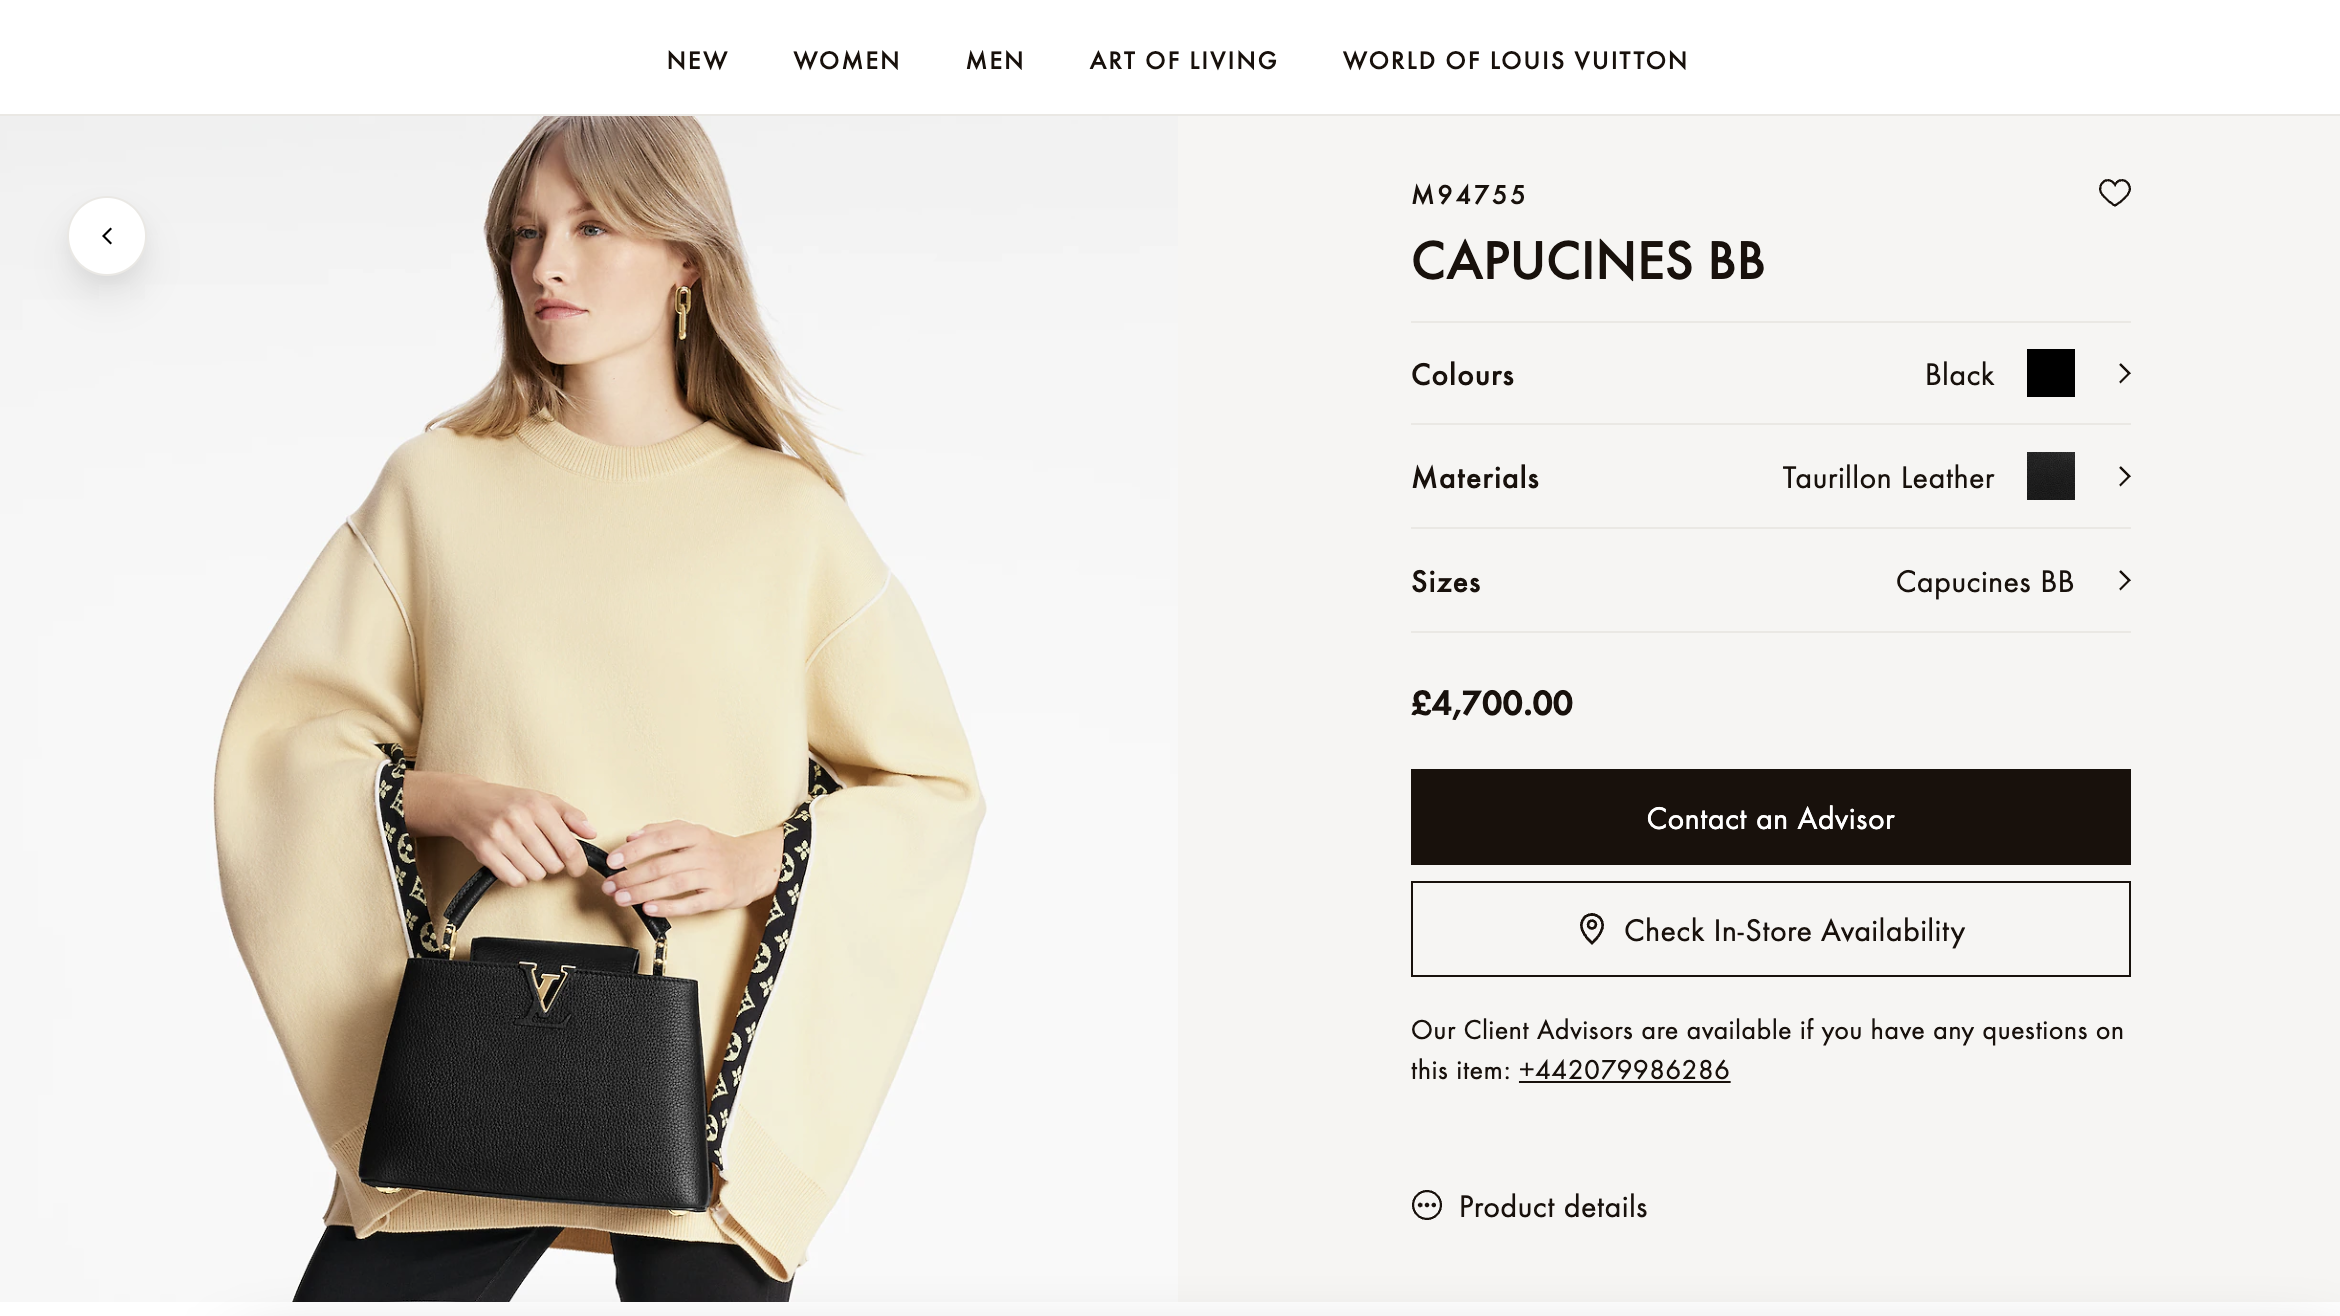 Product page for the Capucines BB bag